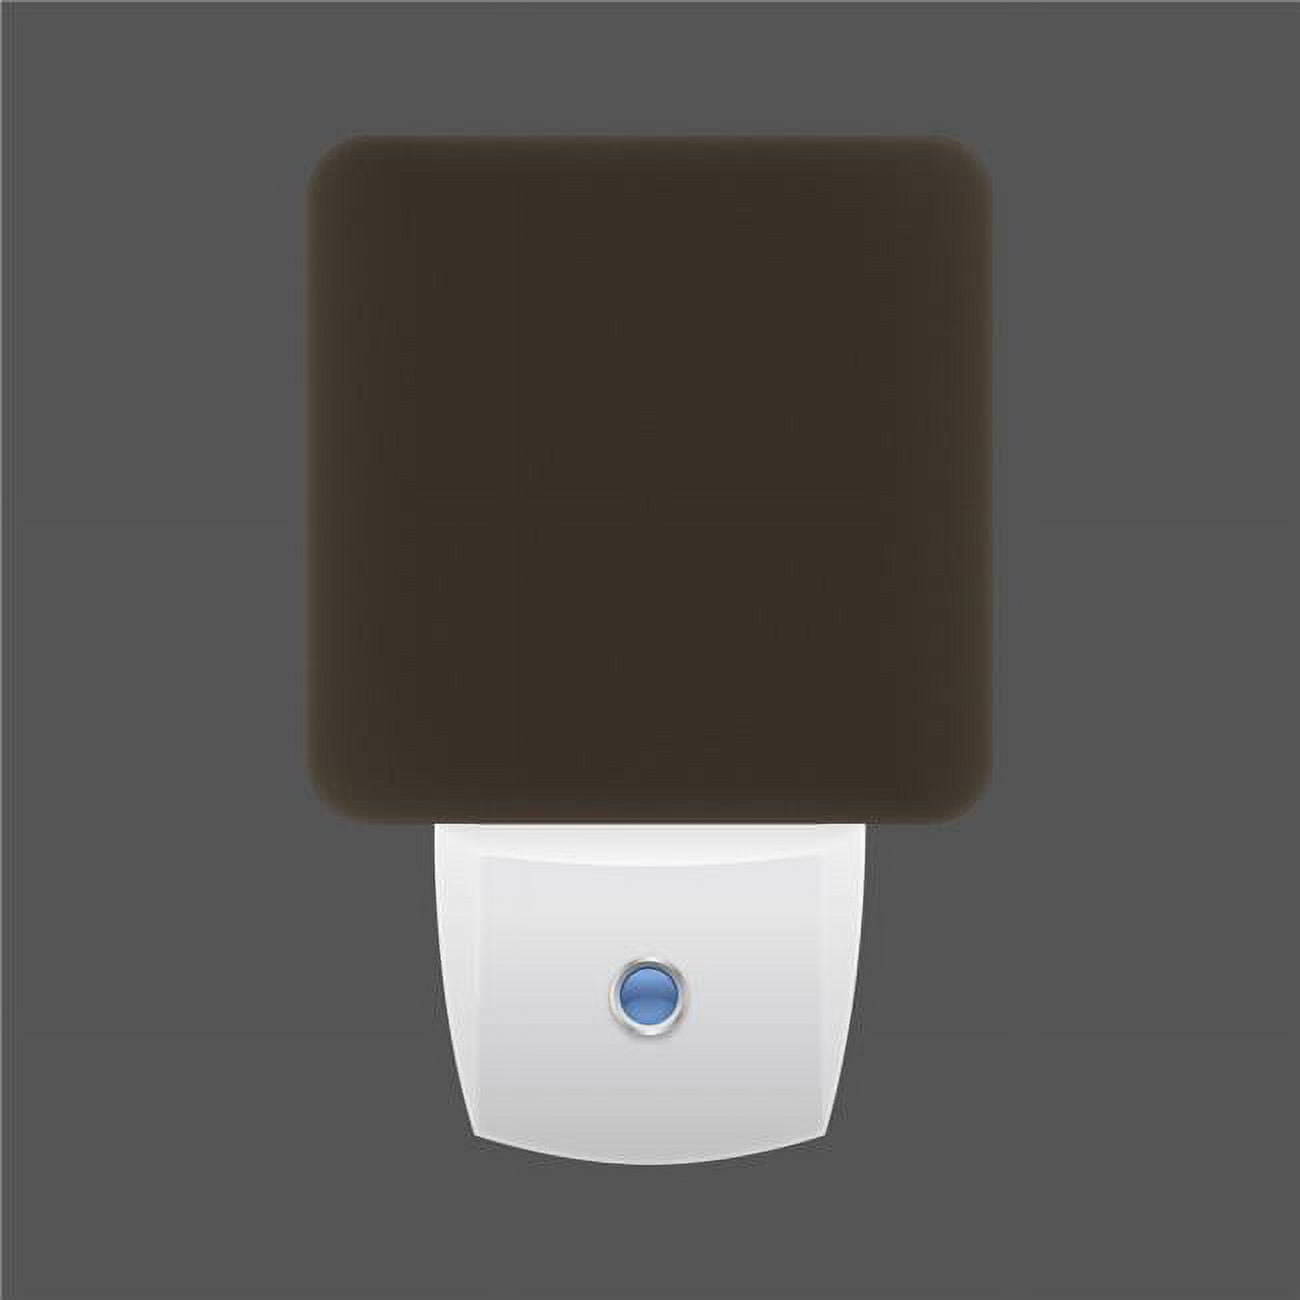 Costabrown Led Night Light